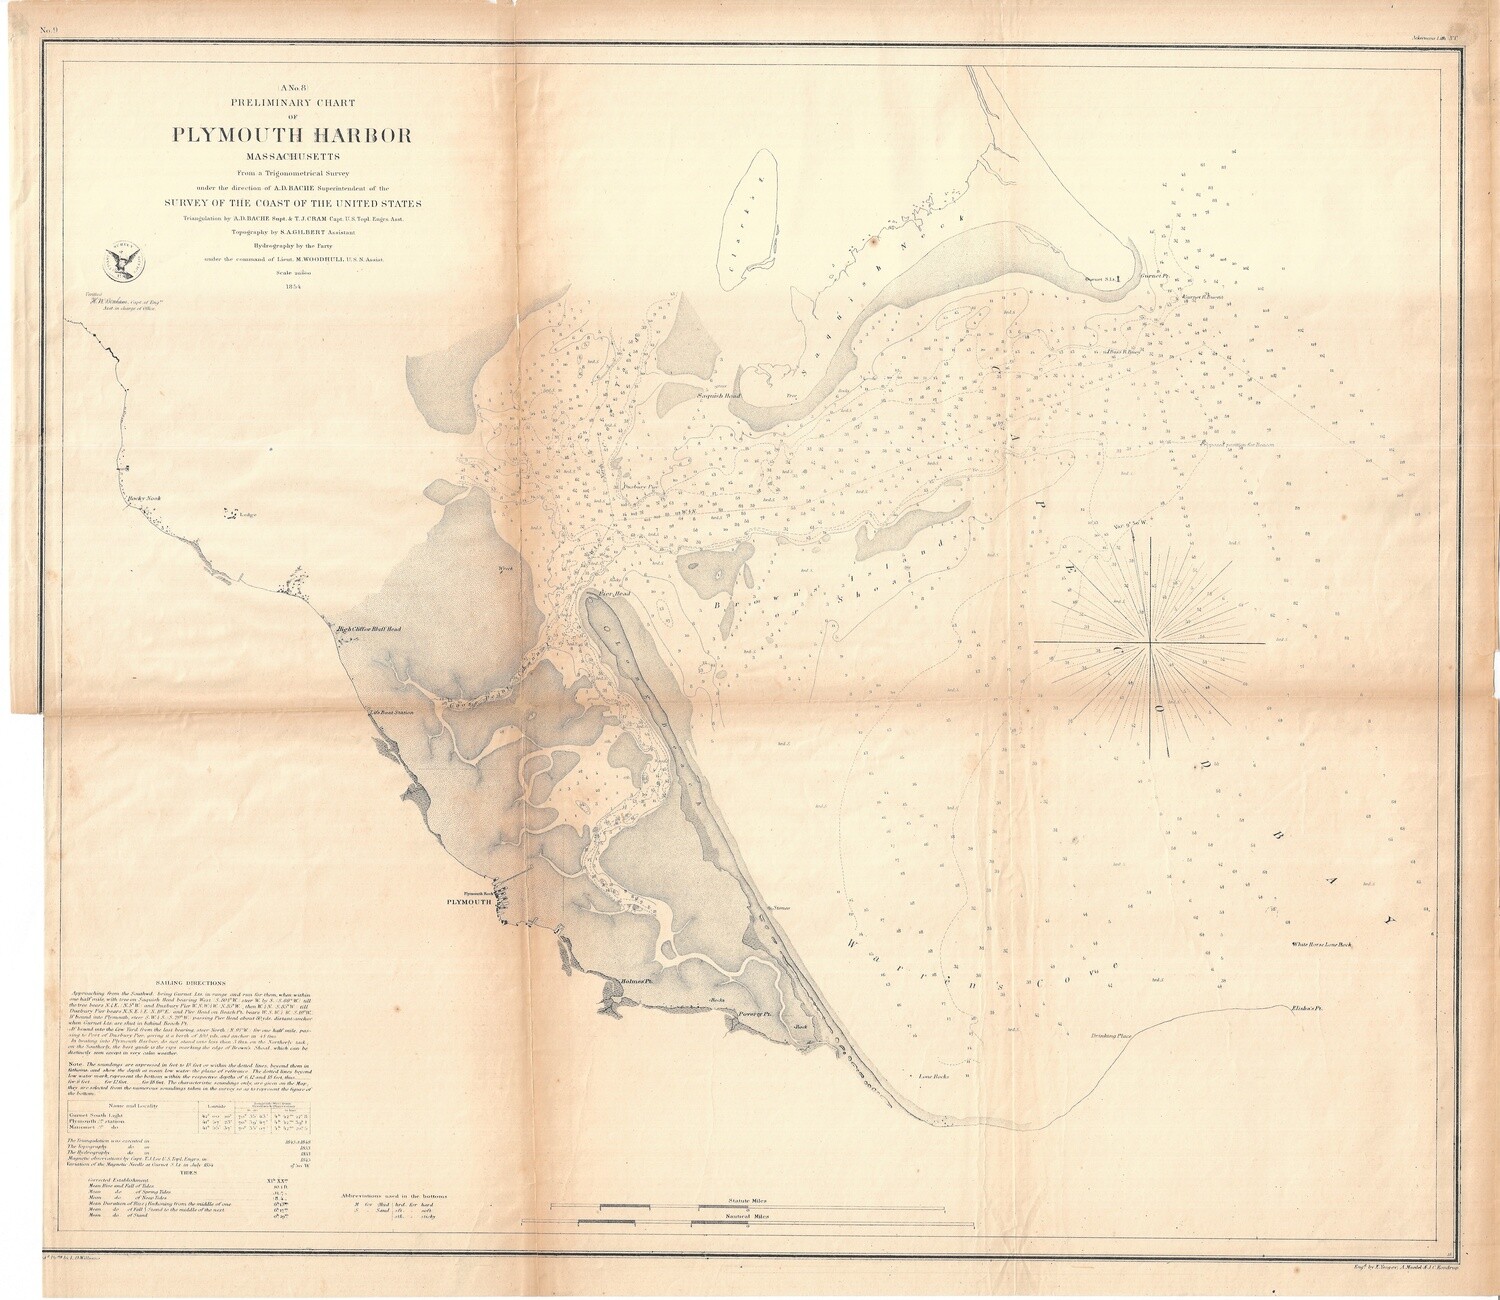 1854 Chart of Plymouth Harbor , MA by the USCS as a Folding Folio in Lithography, as Congressional Documents